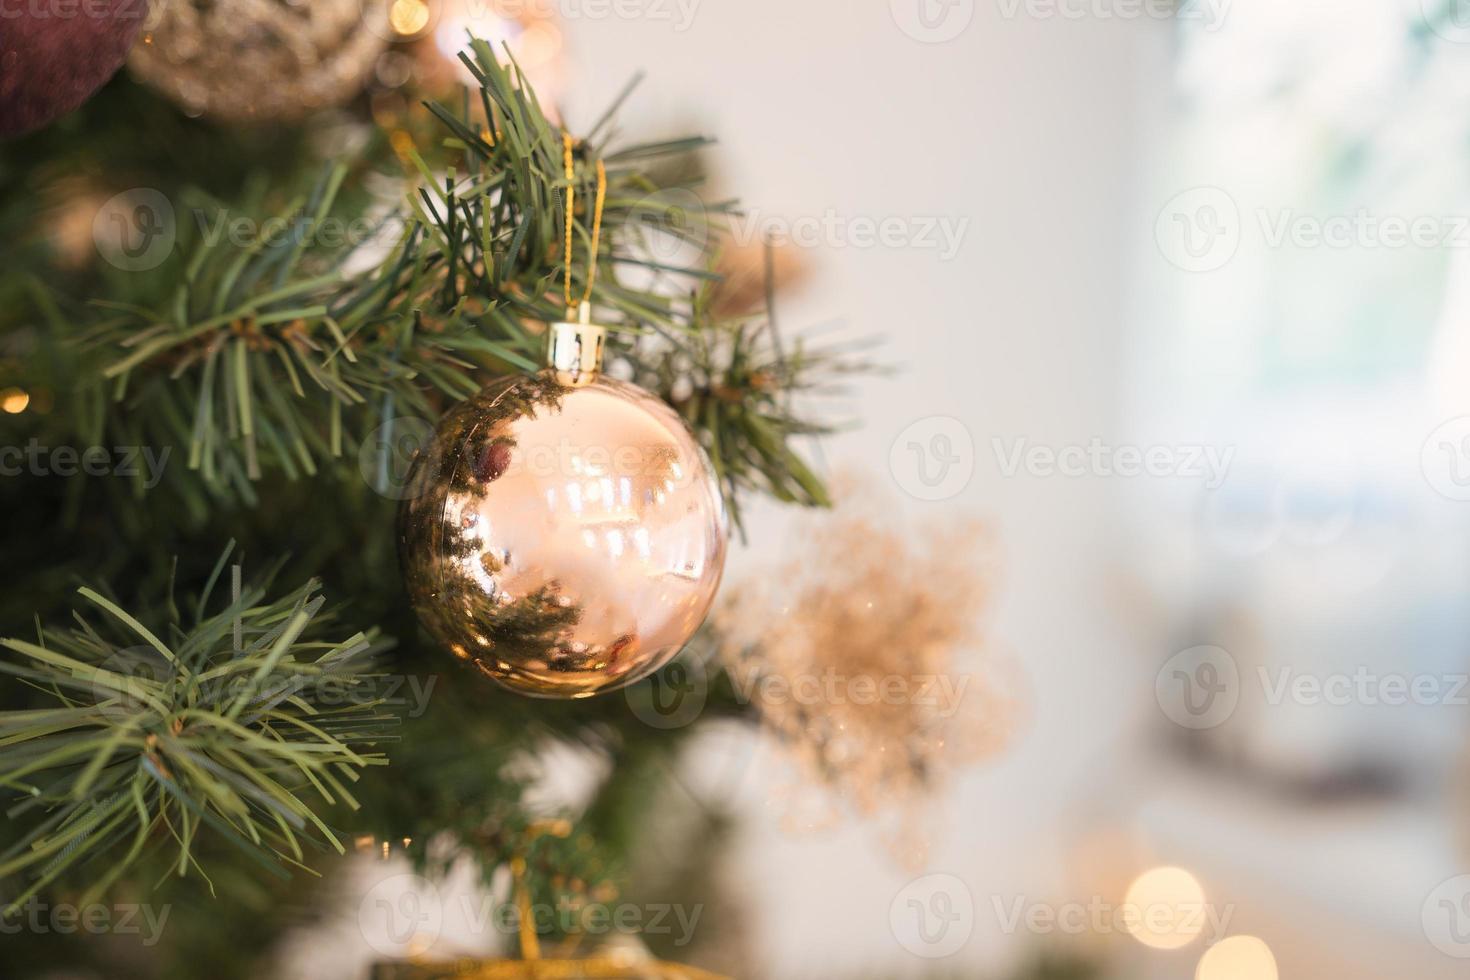 Christmas pine tree with decorative golden ball and bauble ornamental photo